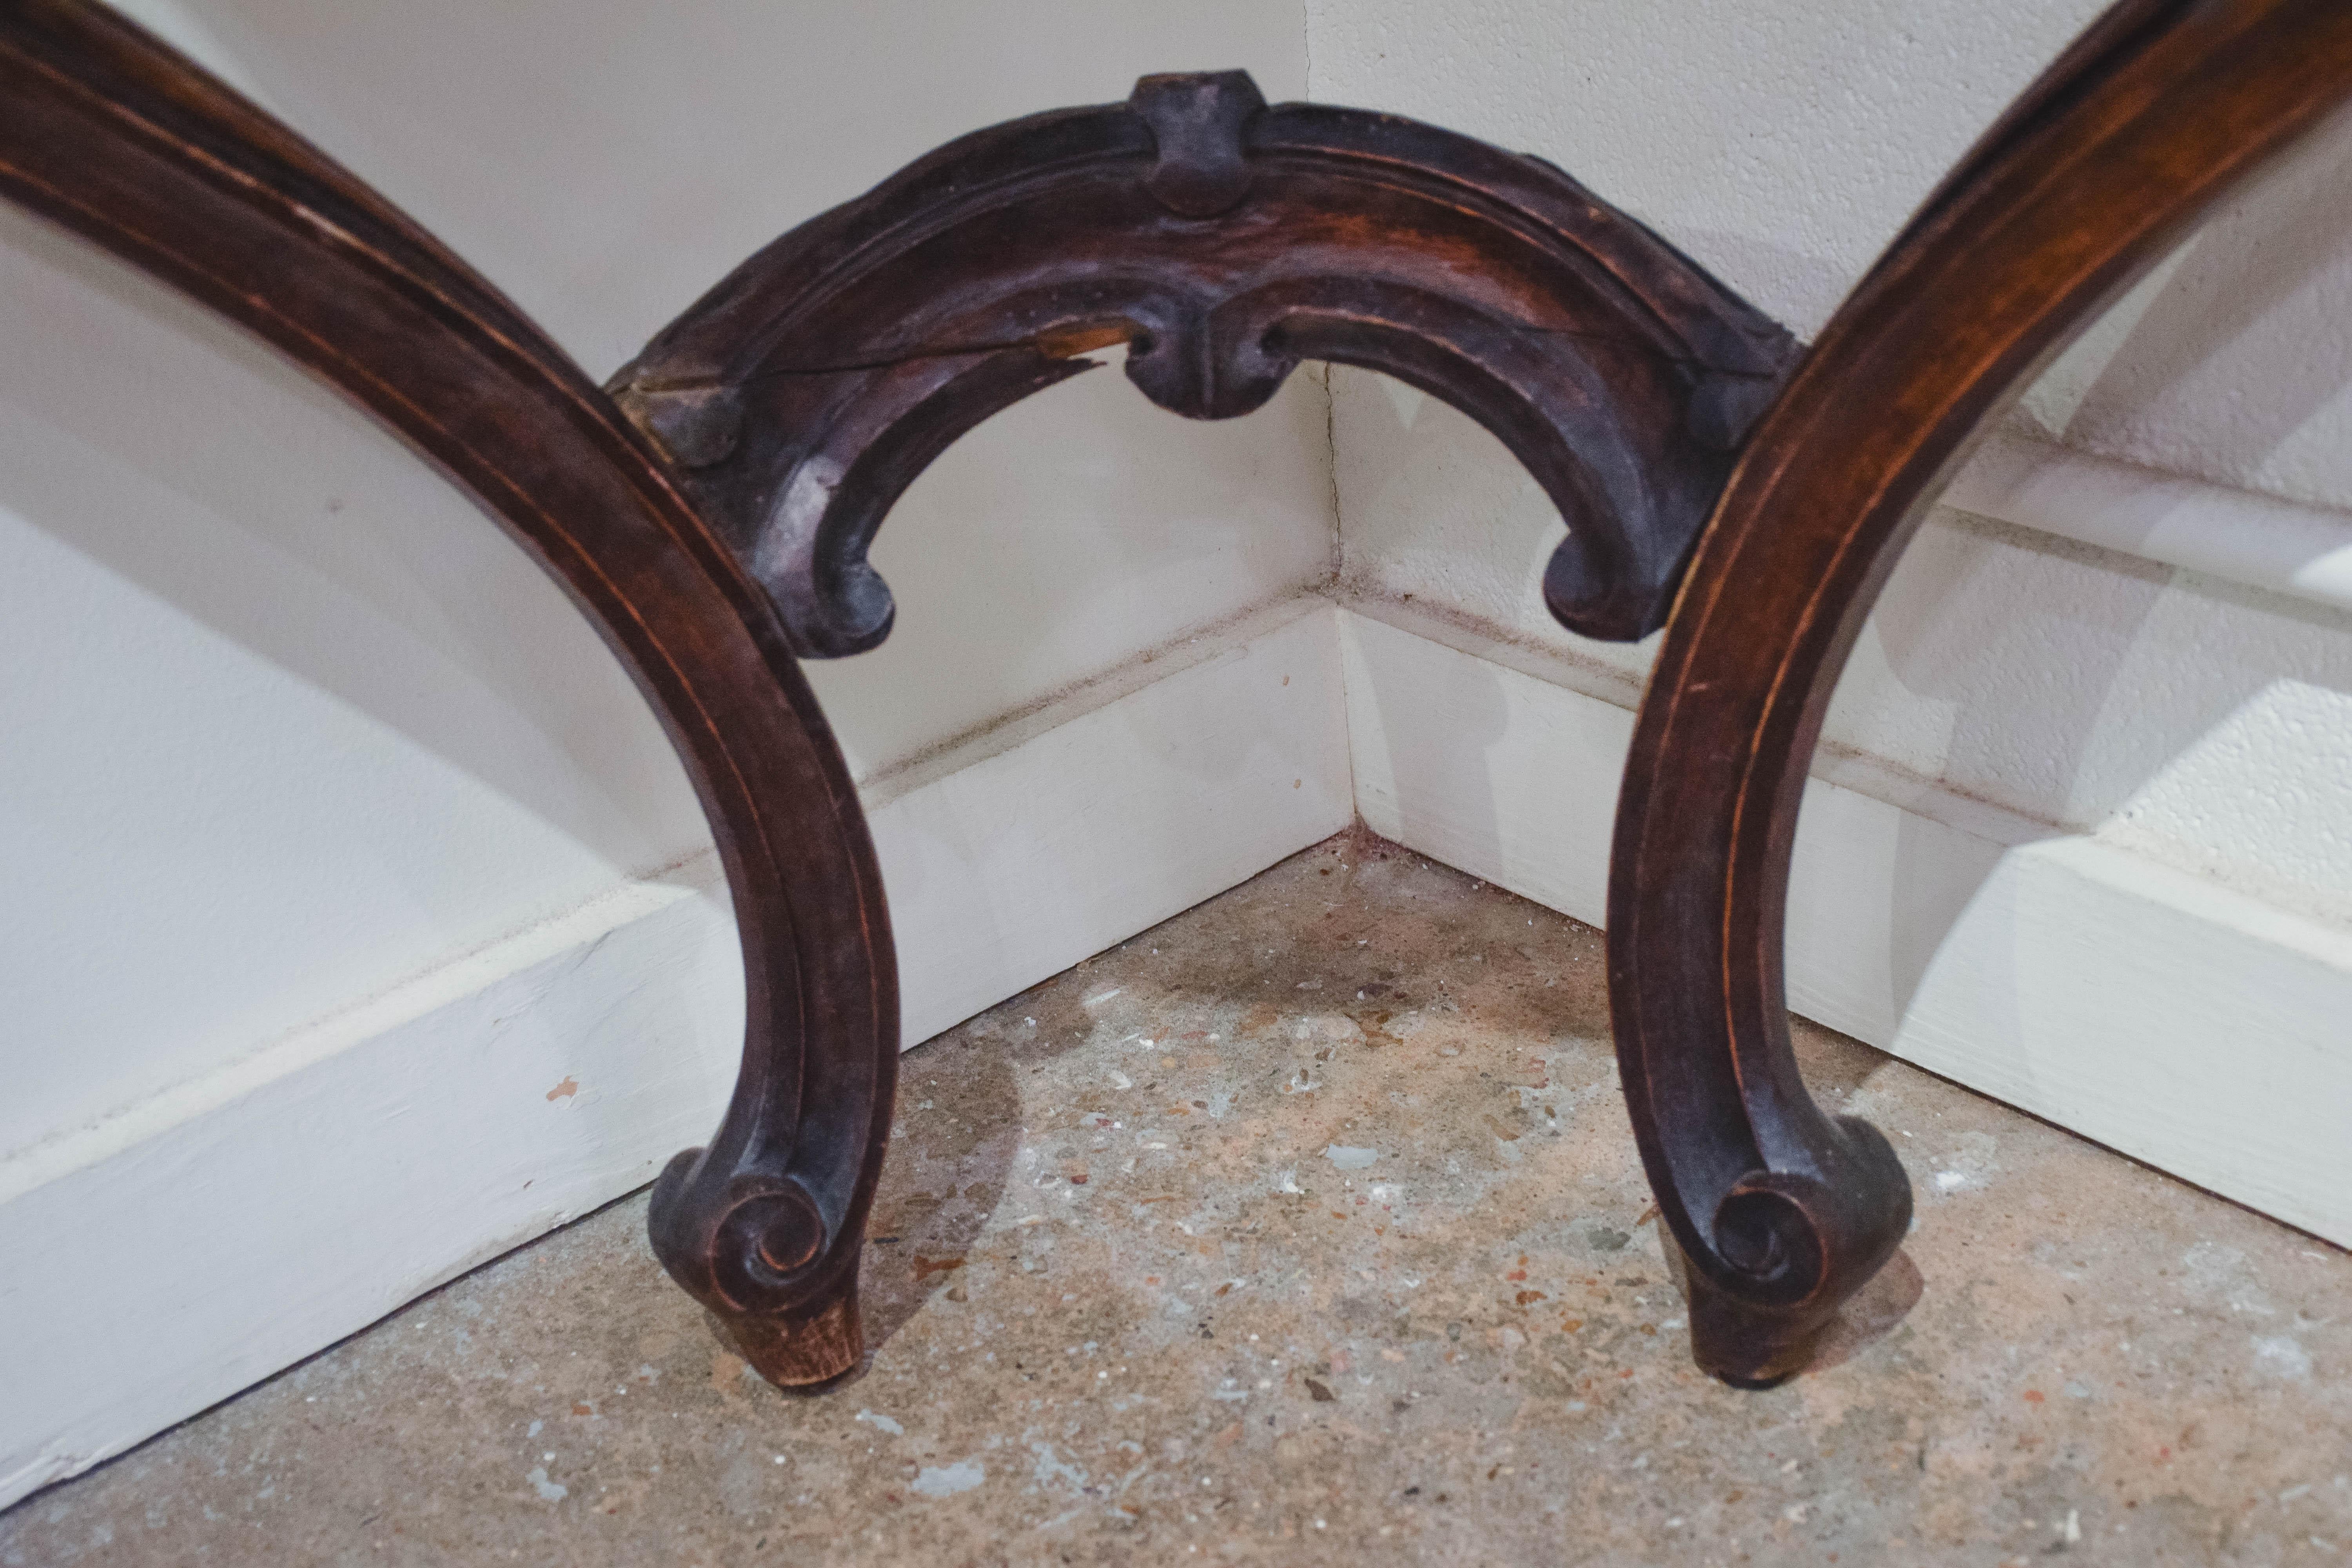 Antique Louis XV marble-top console table, early 19th century. This console table has excellent quality carving. Made of walnut.